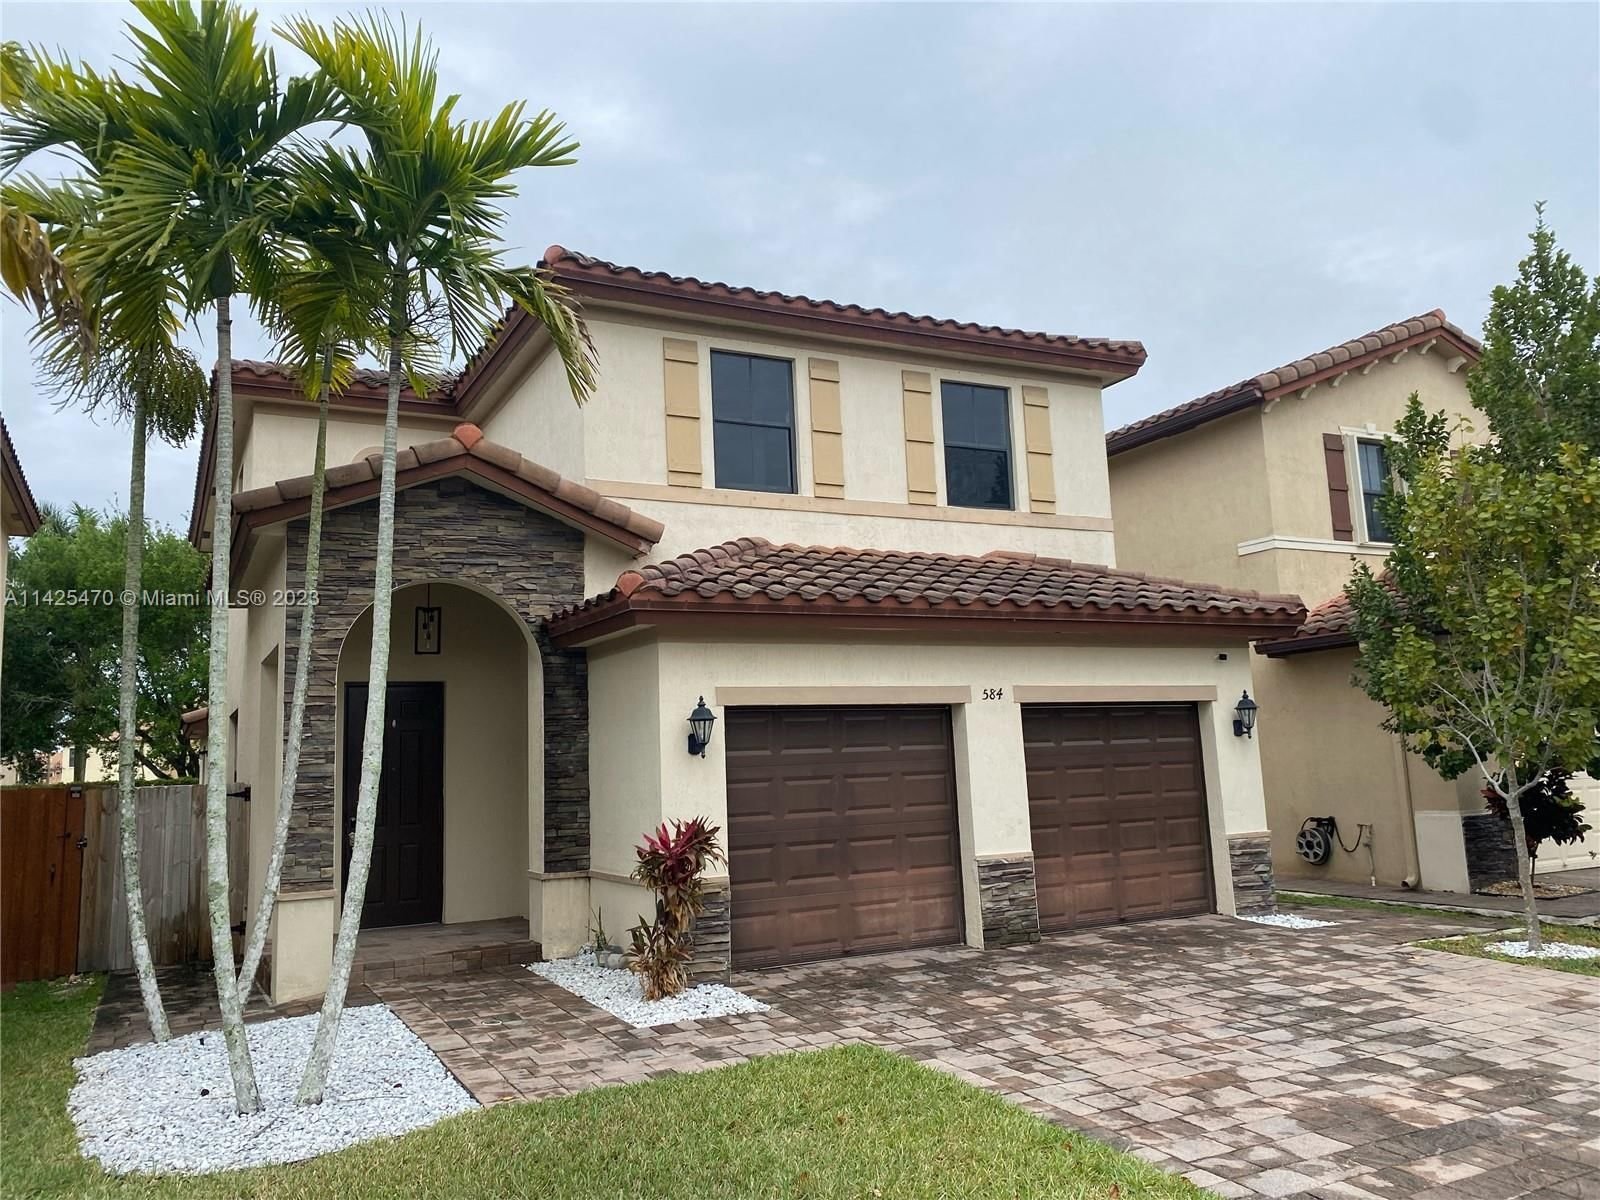 Real estate property located at 584 33rd Ter, Miami-Dade County, BAYWINDS OF FLORES, Homestead, FL